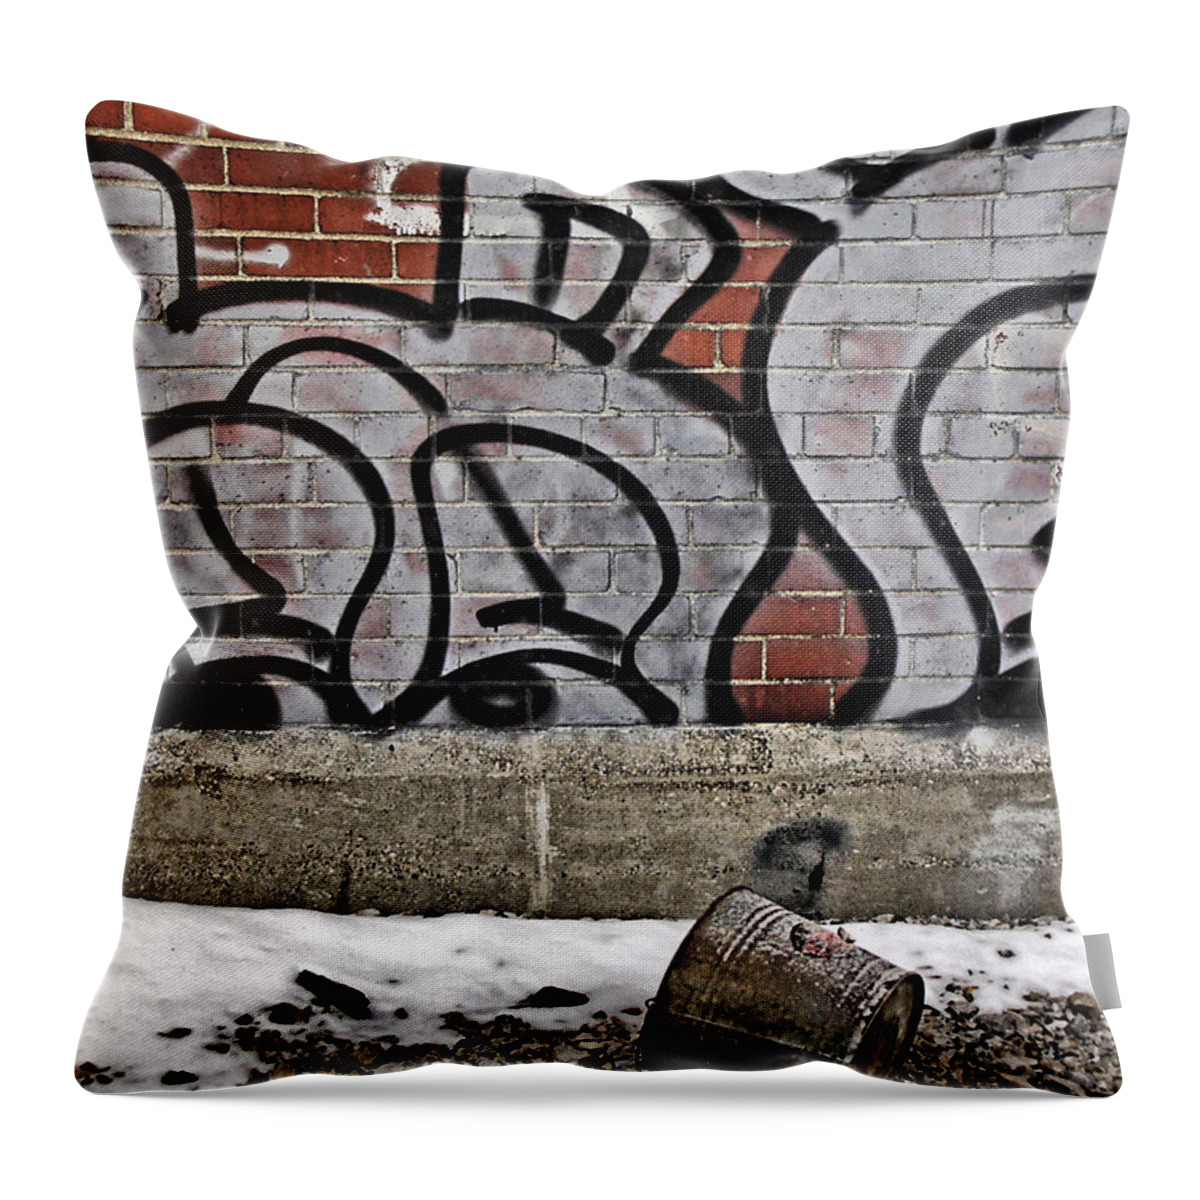 Graffiti Throw Pillow featuring the photograph Buckets by Terry Doyle